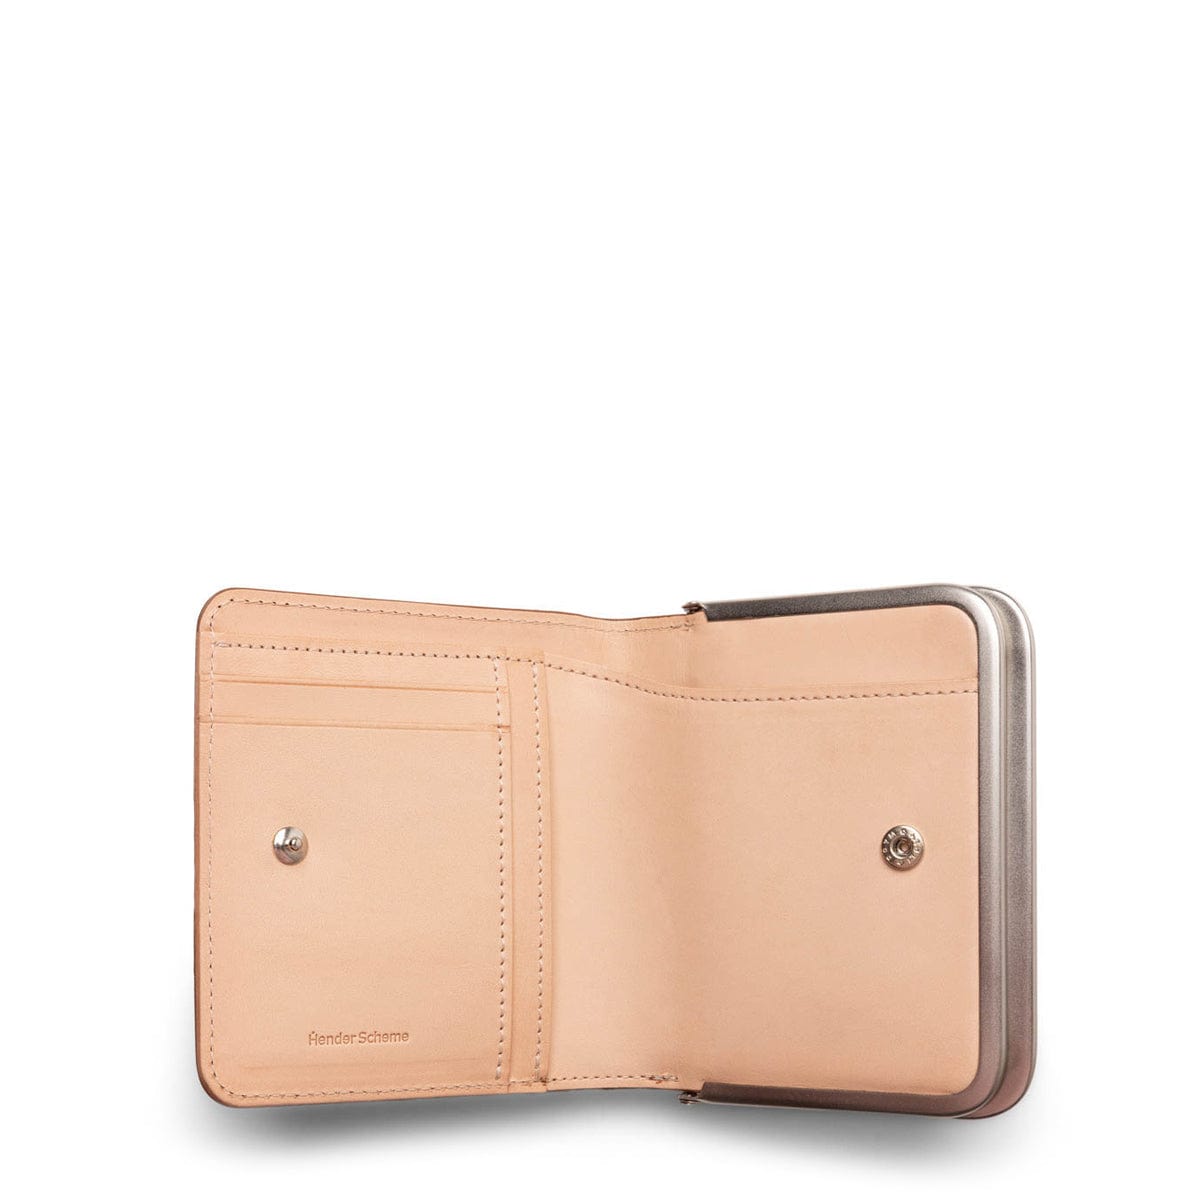 Hender Scheme Wallets & Cases BROWN / O/S HAIRY SNAP WALLET